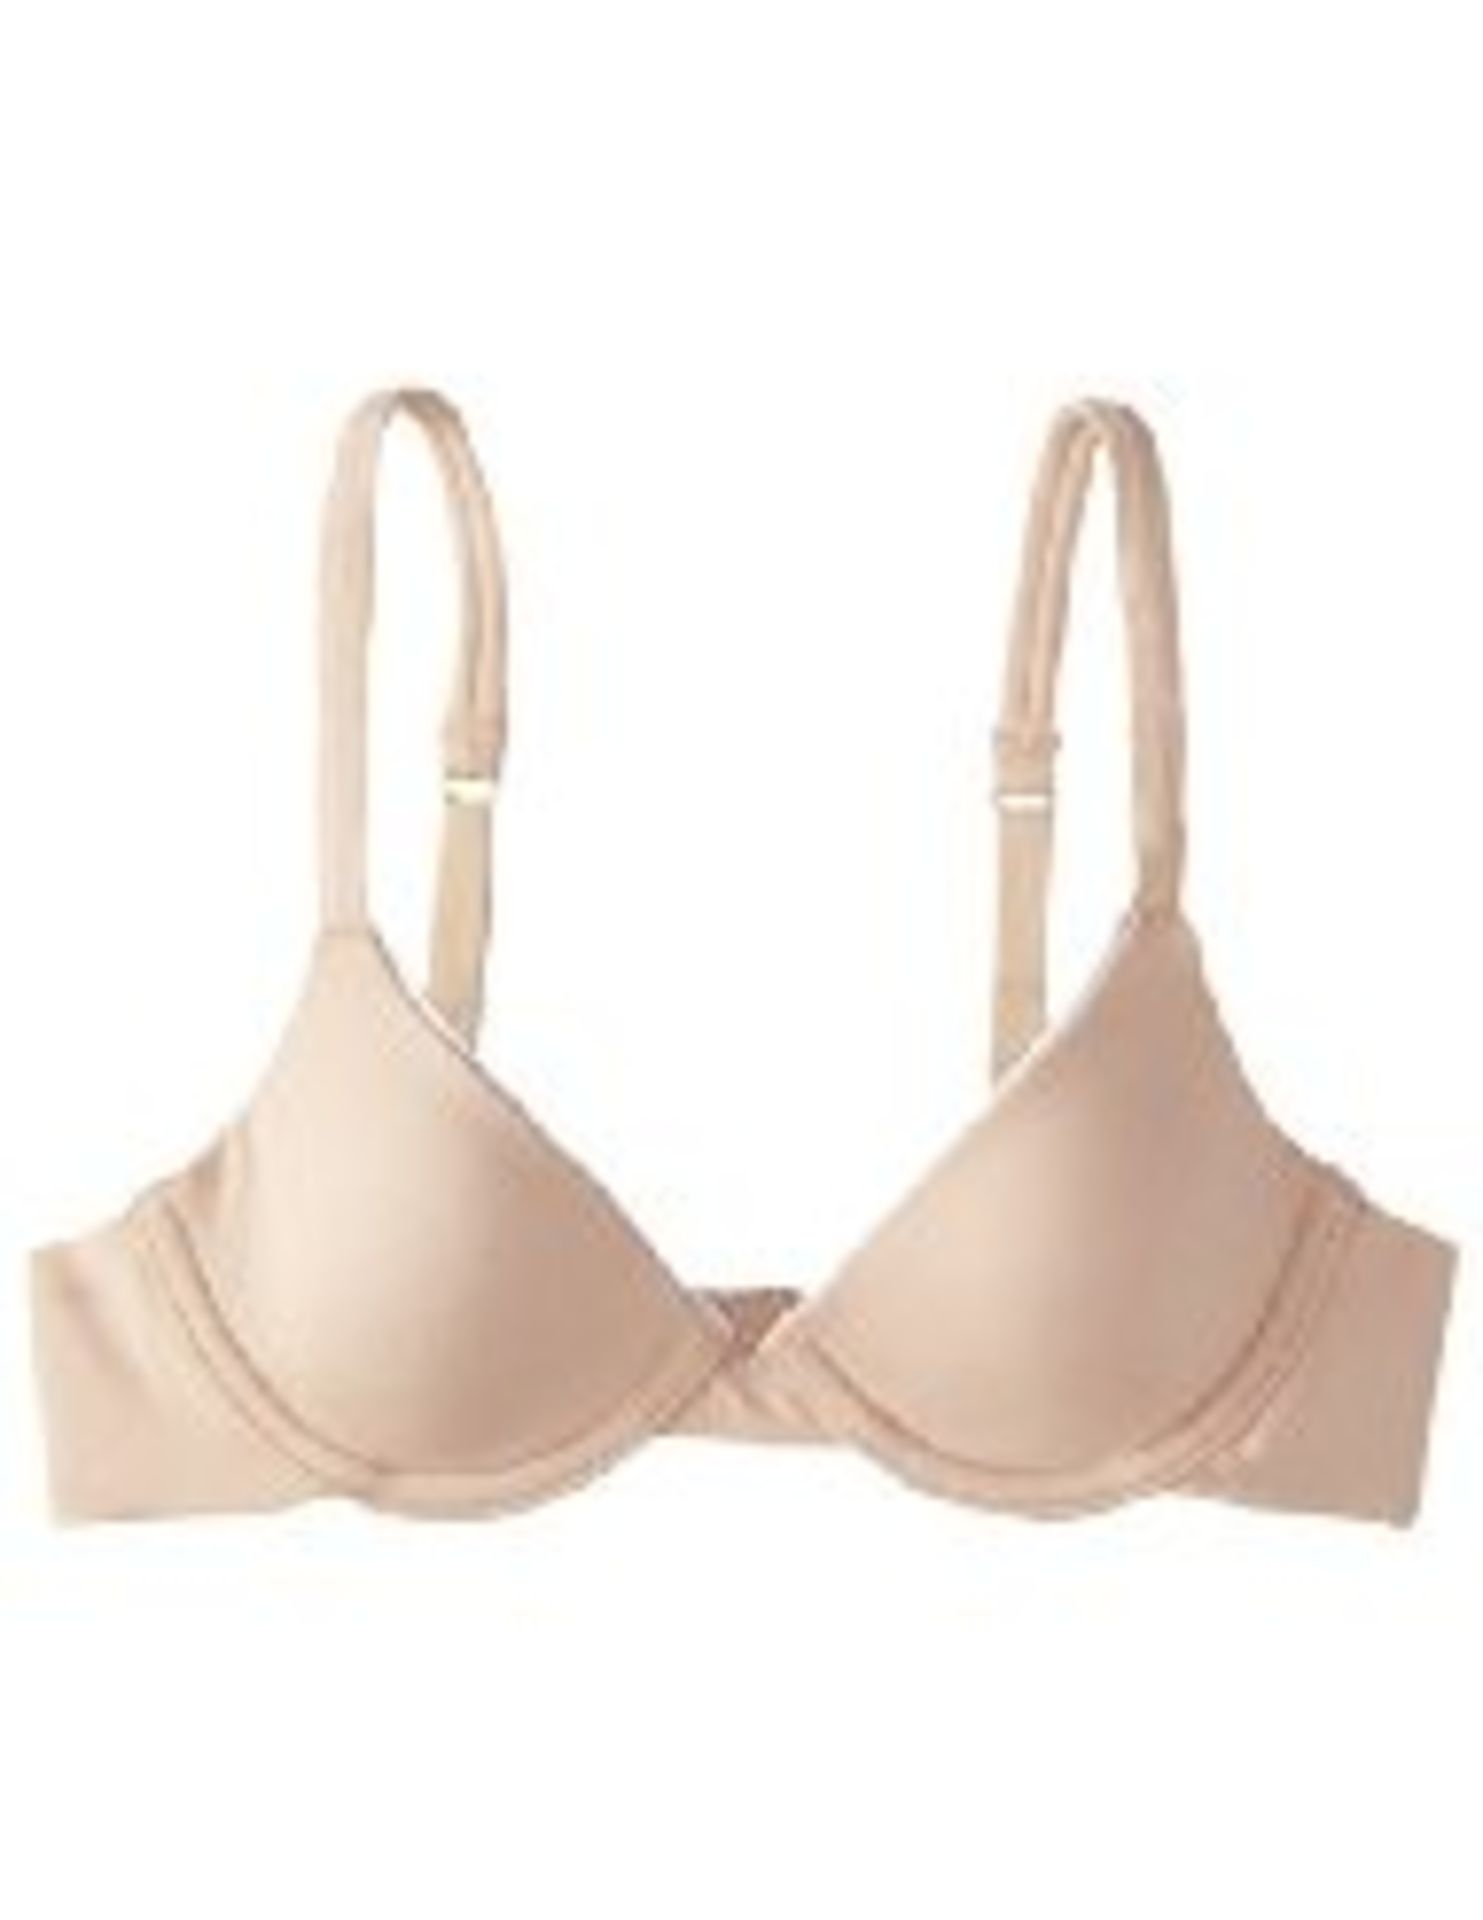 + VAT Brand New Pink Maidenform For girls Fabulous Fit Bra Size 34A ISP £12.90 (JC Penney)